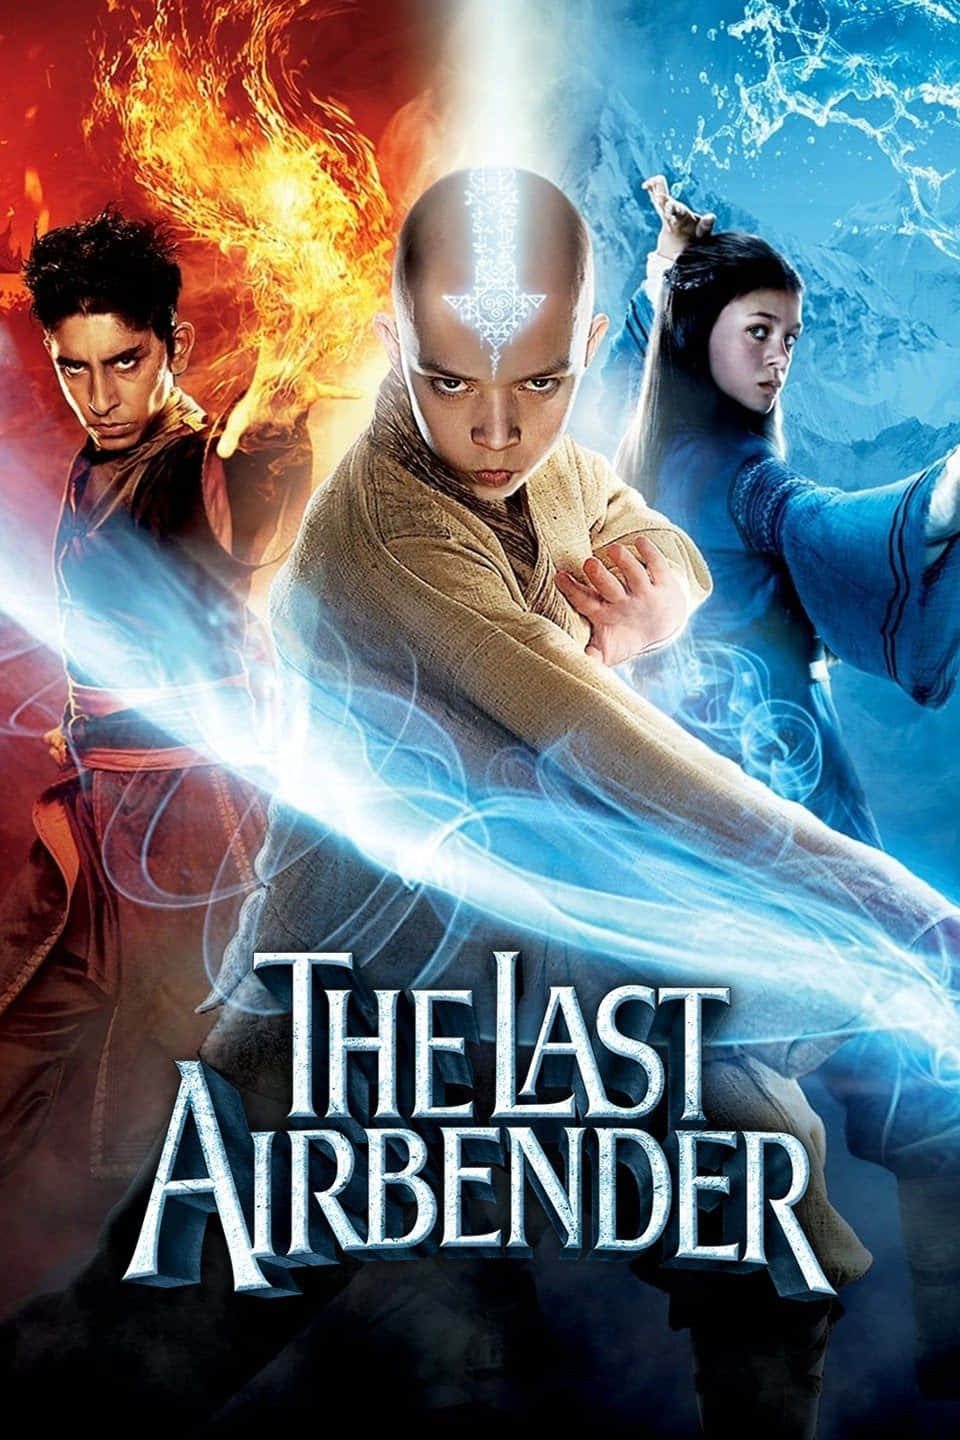 All Four Elements of Avatar The Last Airbender in One Place